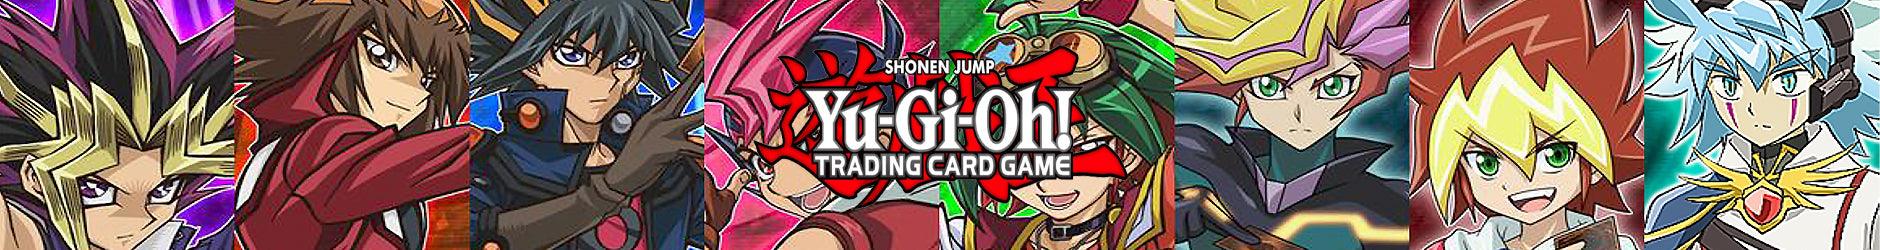 Yu-Gi-Oh! All Products - Romulus Games